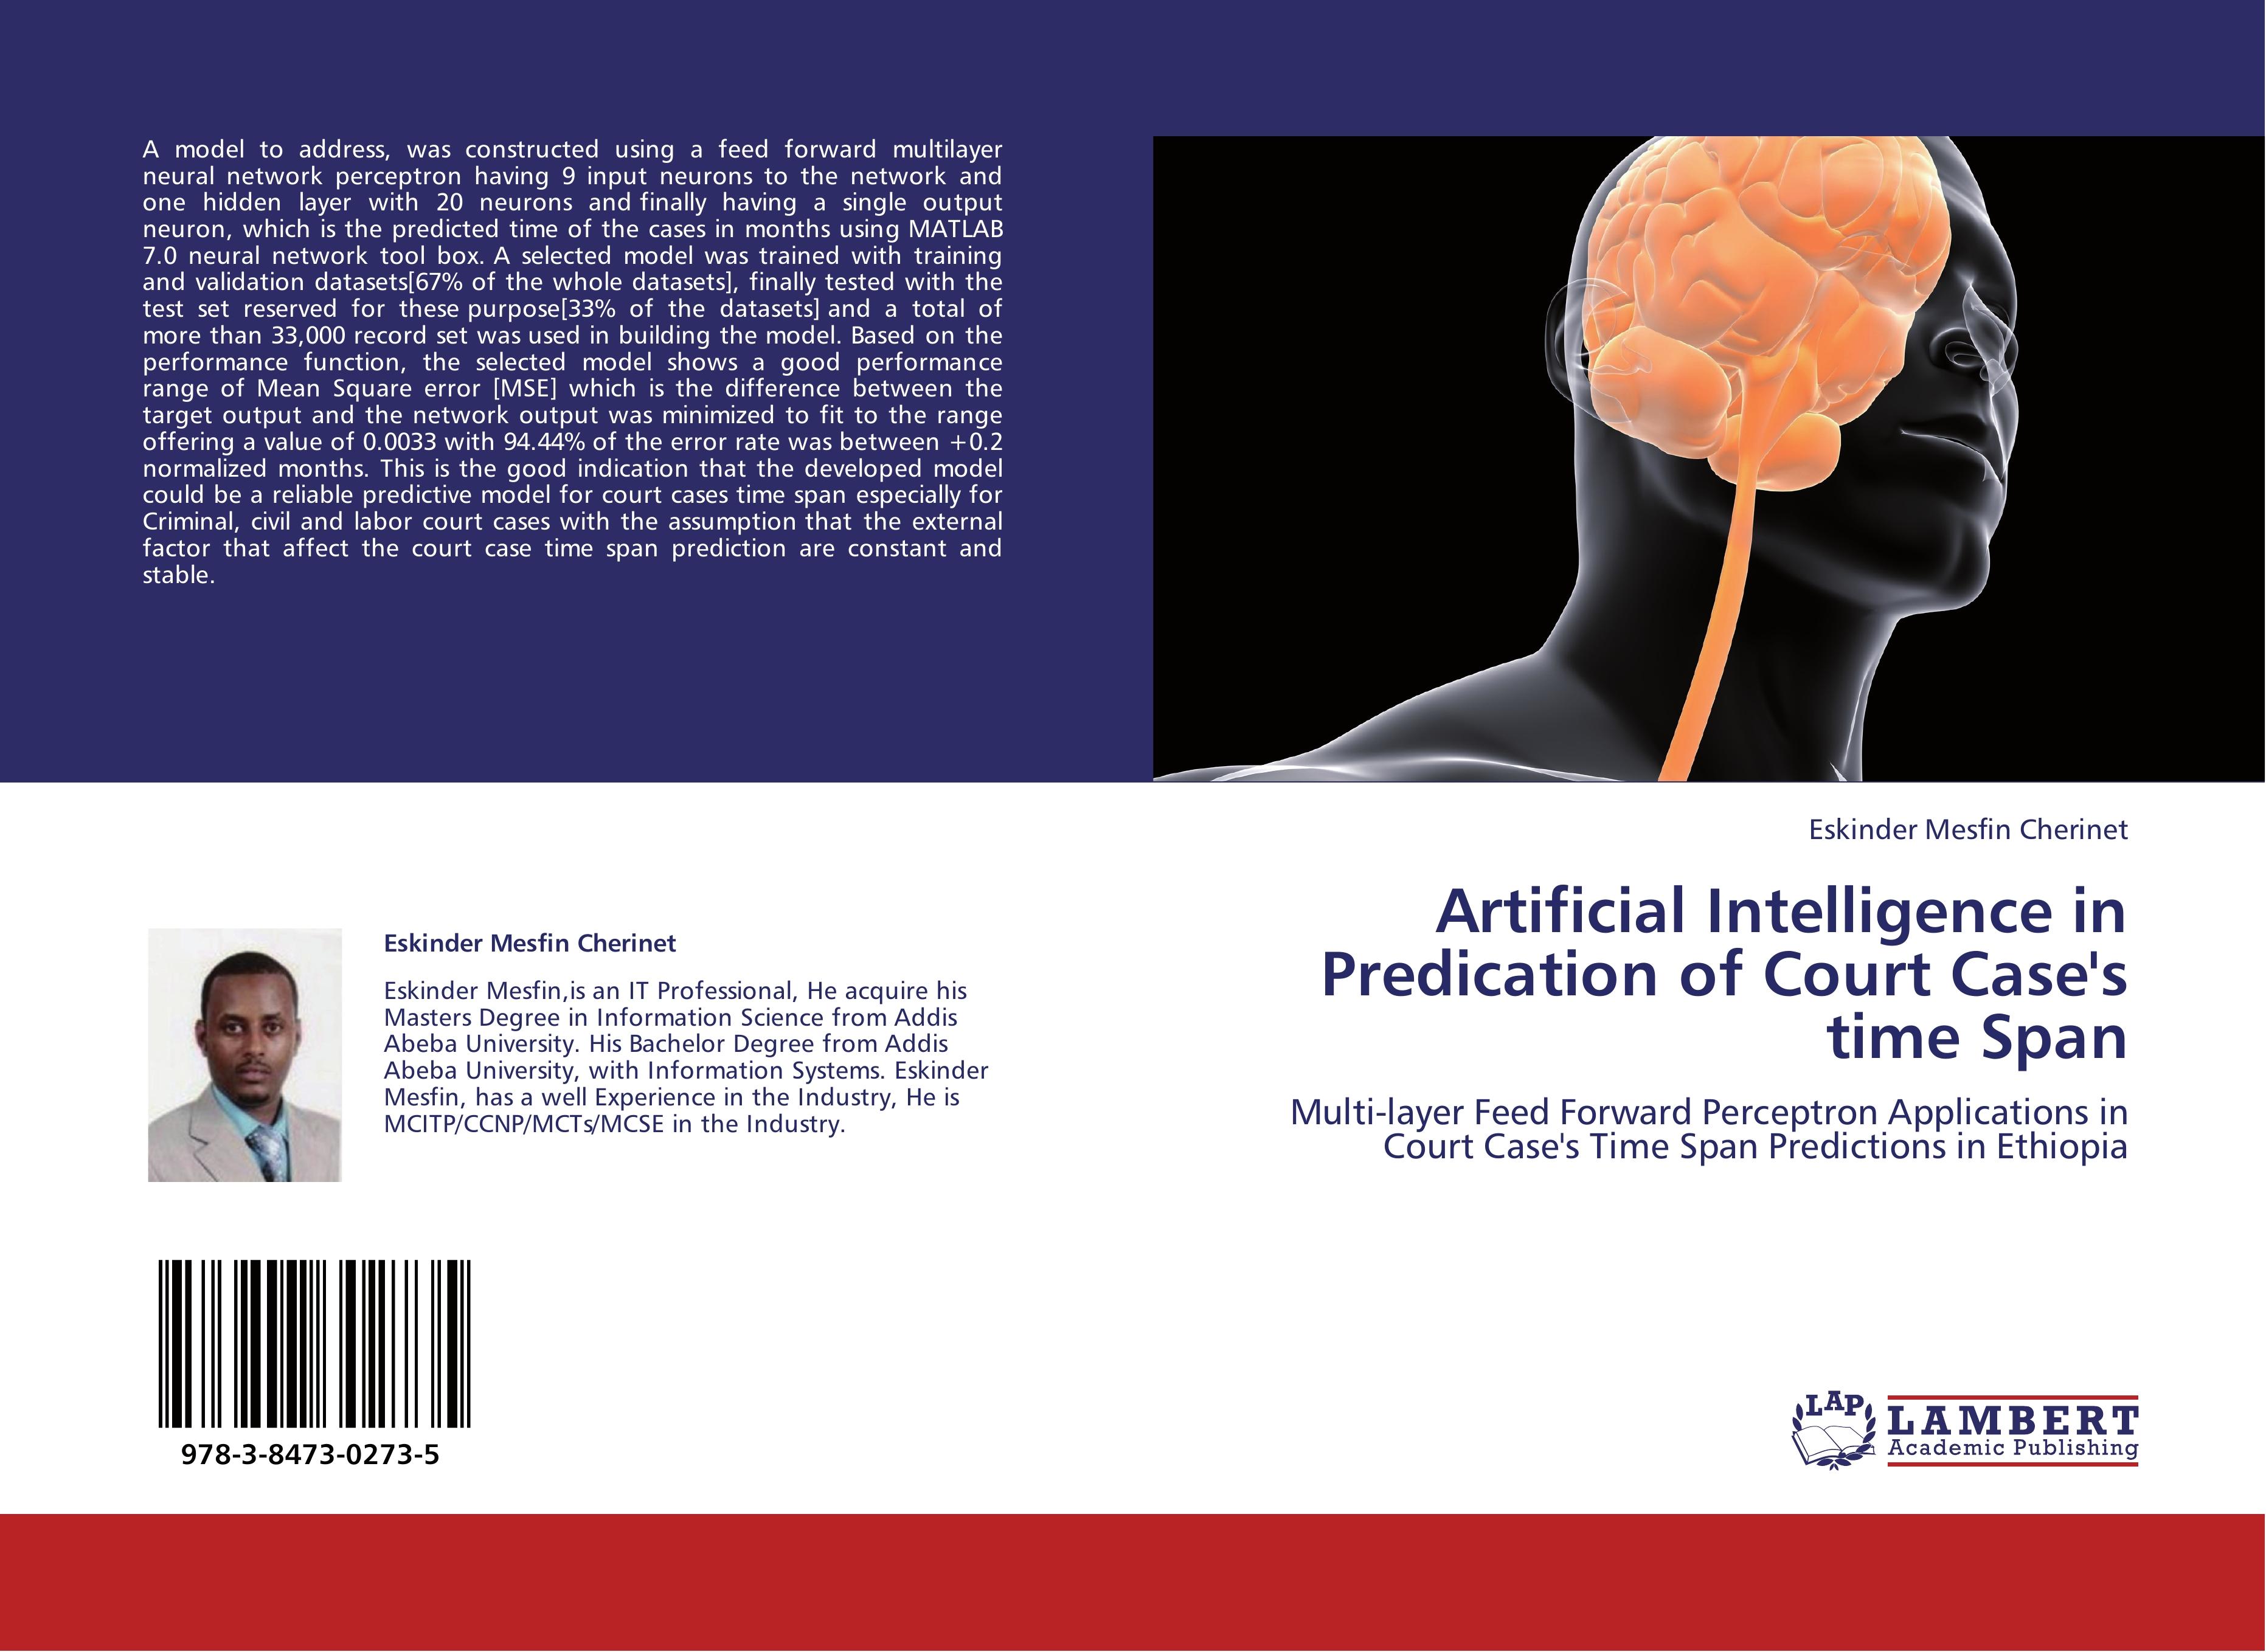 Artificial Intelligence in Predication of Court Case s time Span - Eskinder Mesfin Cherinet